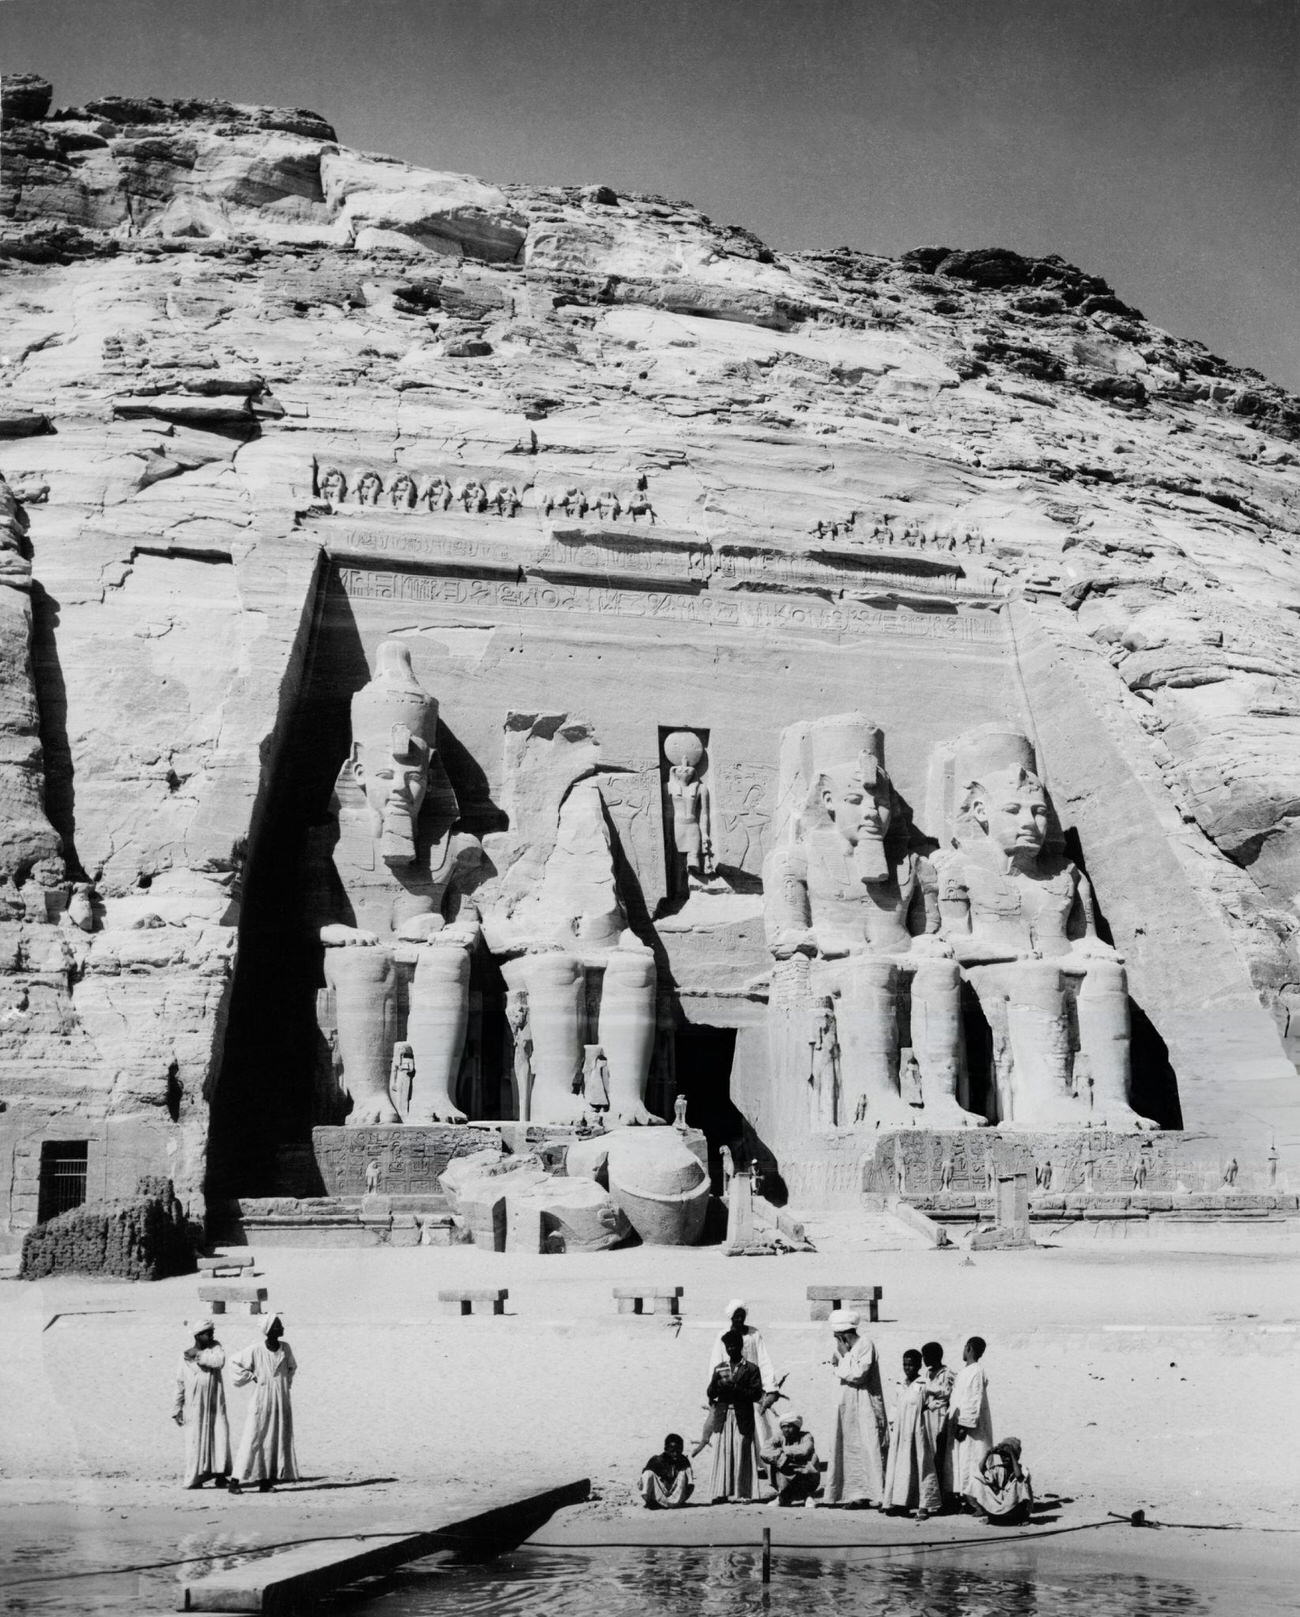 The four 20-metre-high statues of Pharaoh Ramesses II at Abu Simbel, Egypt, in 1964, before their relocation due to the Aswan High Dam's rising Nile waters.